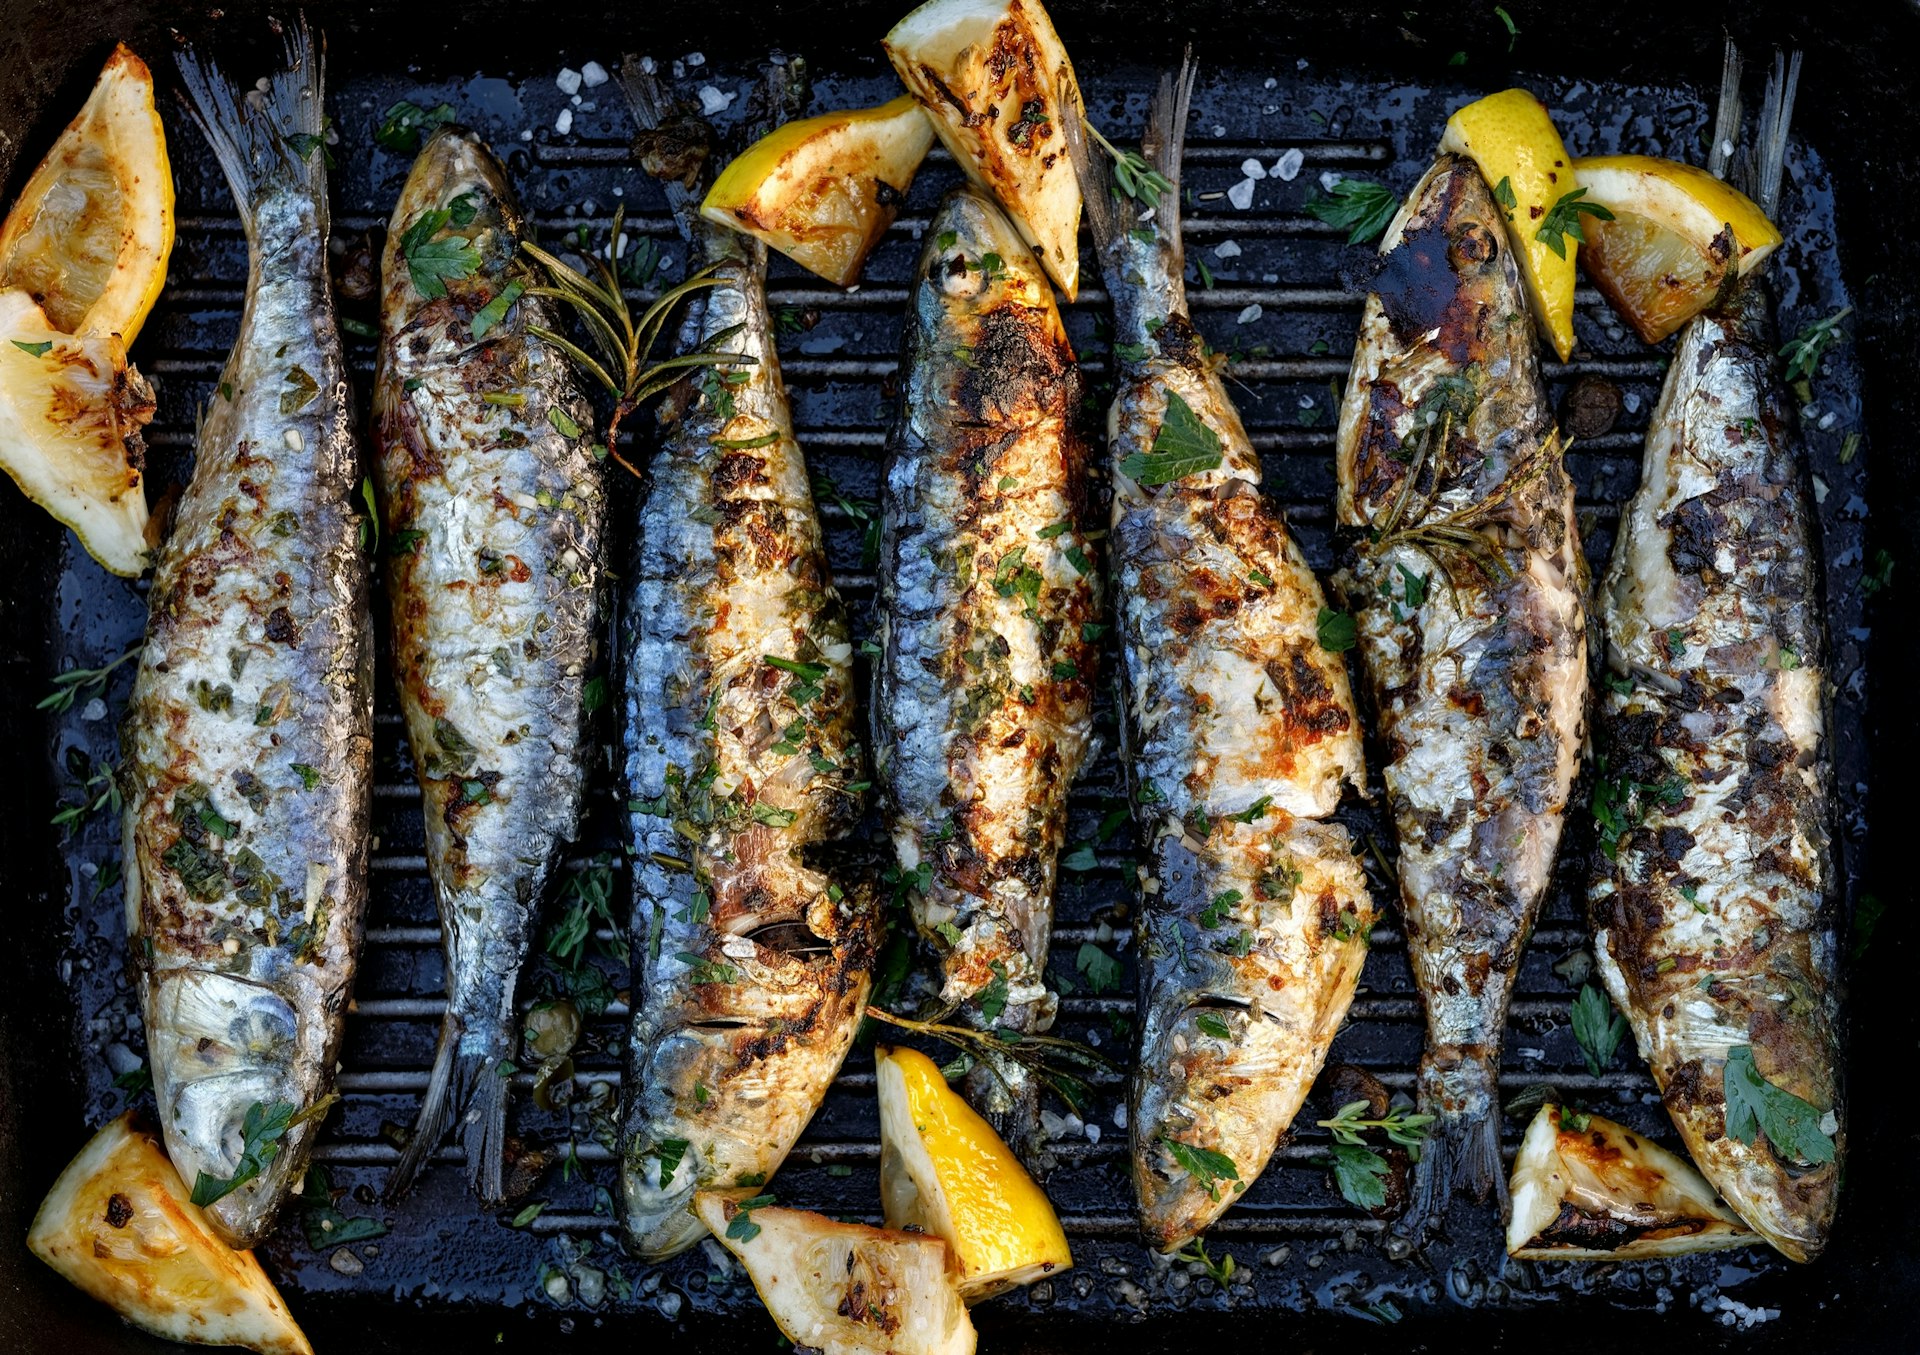 Grilled,Sardines,In,A,Herbal,Lemon,Marinade,On,A,Grill